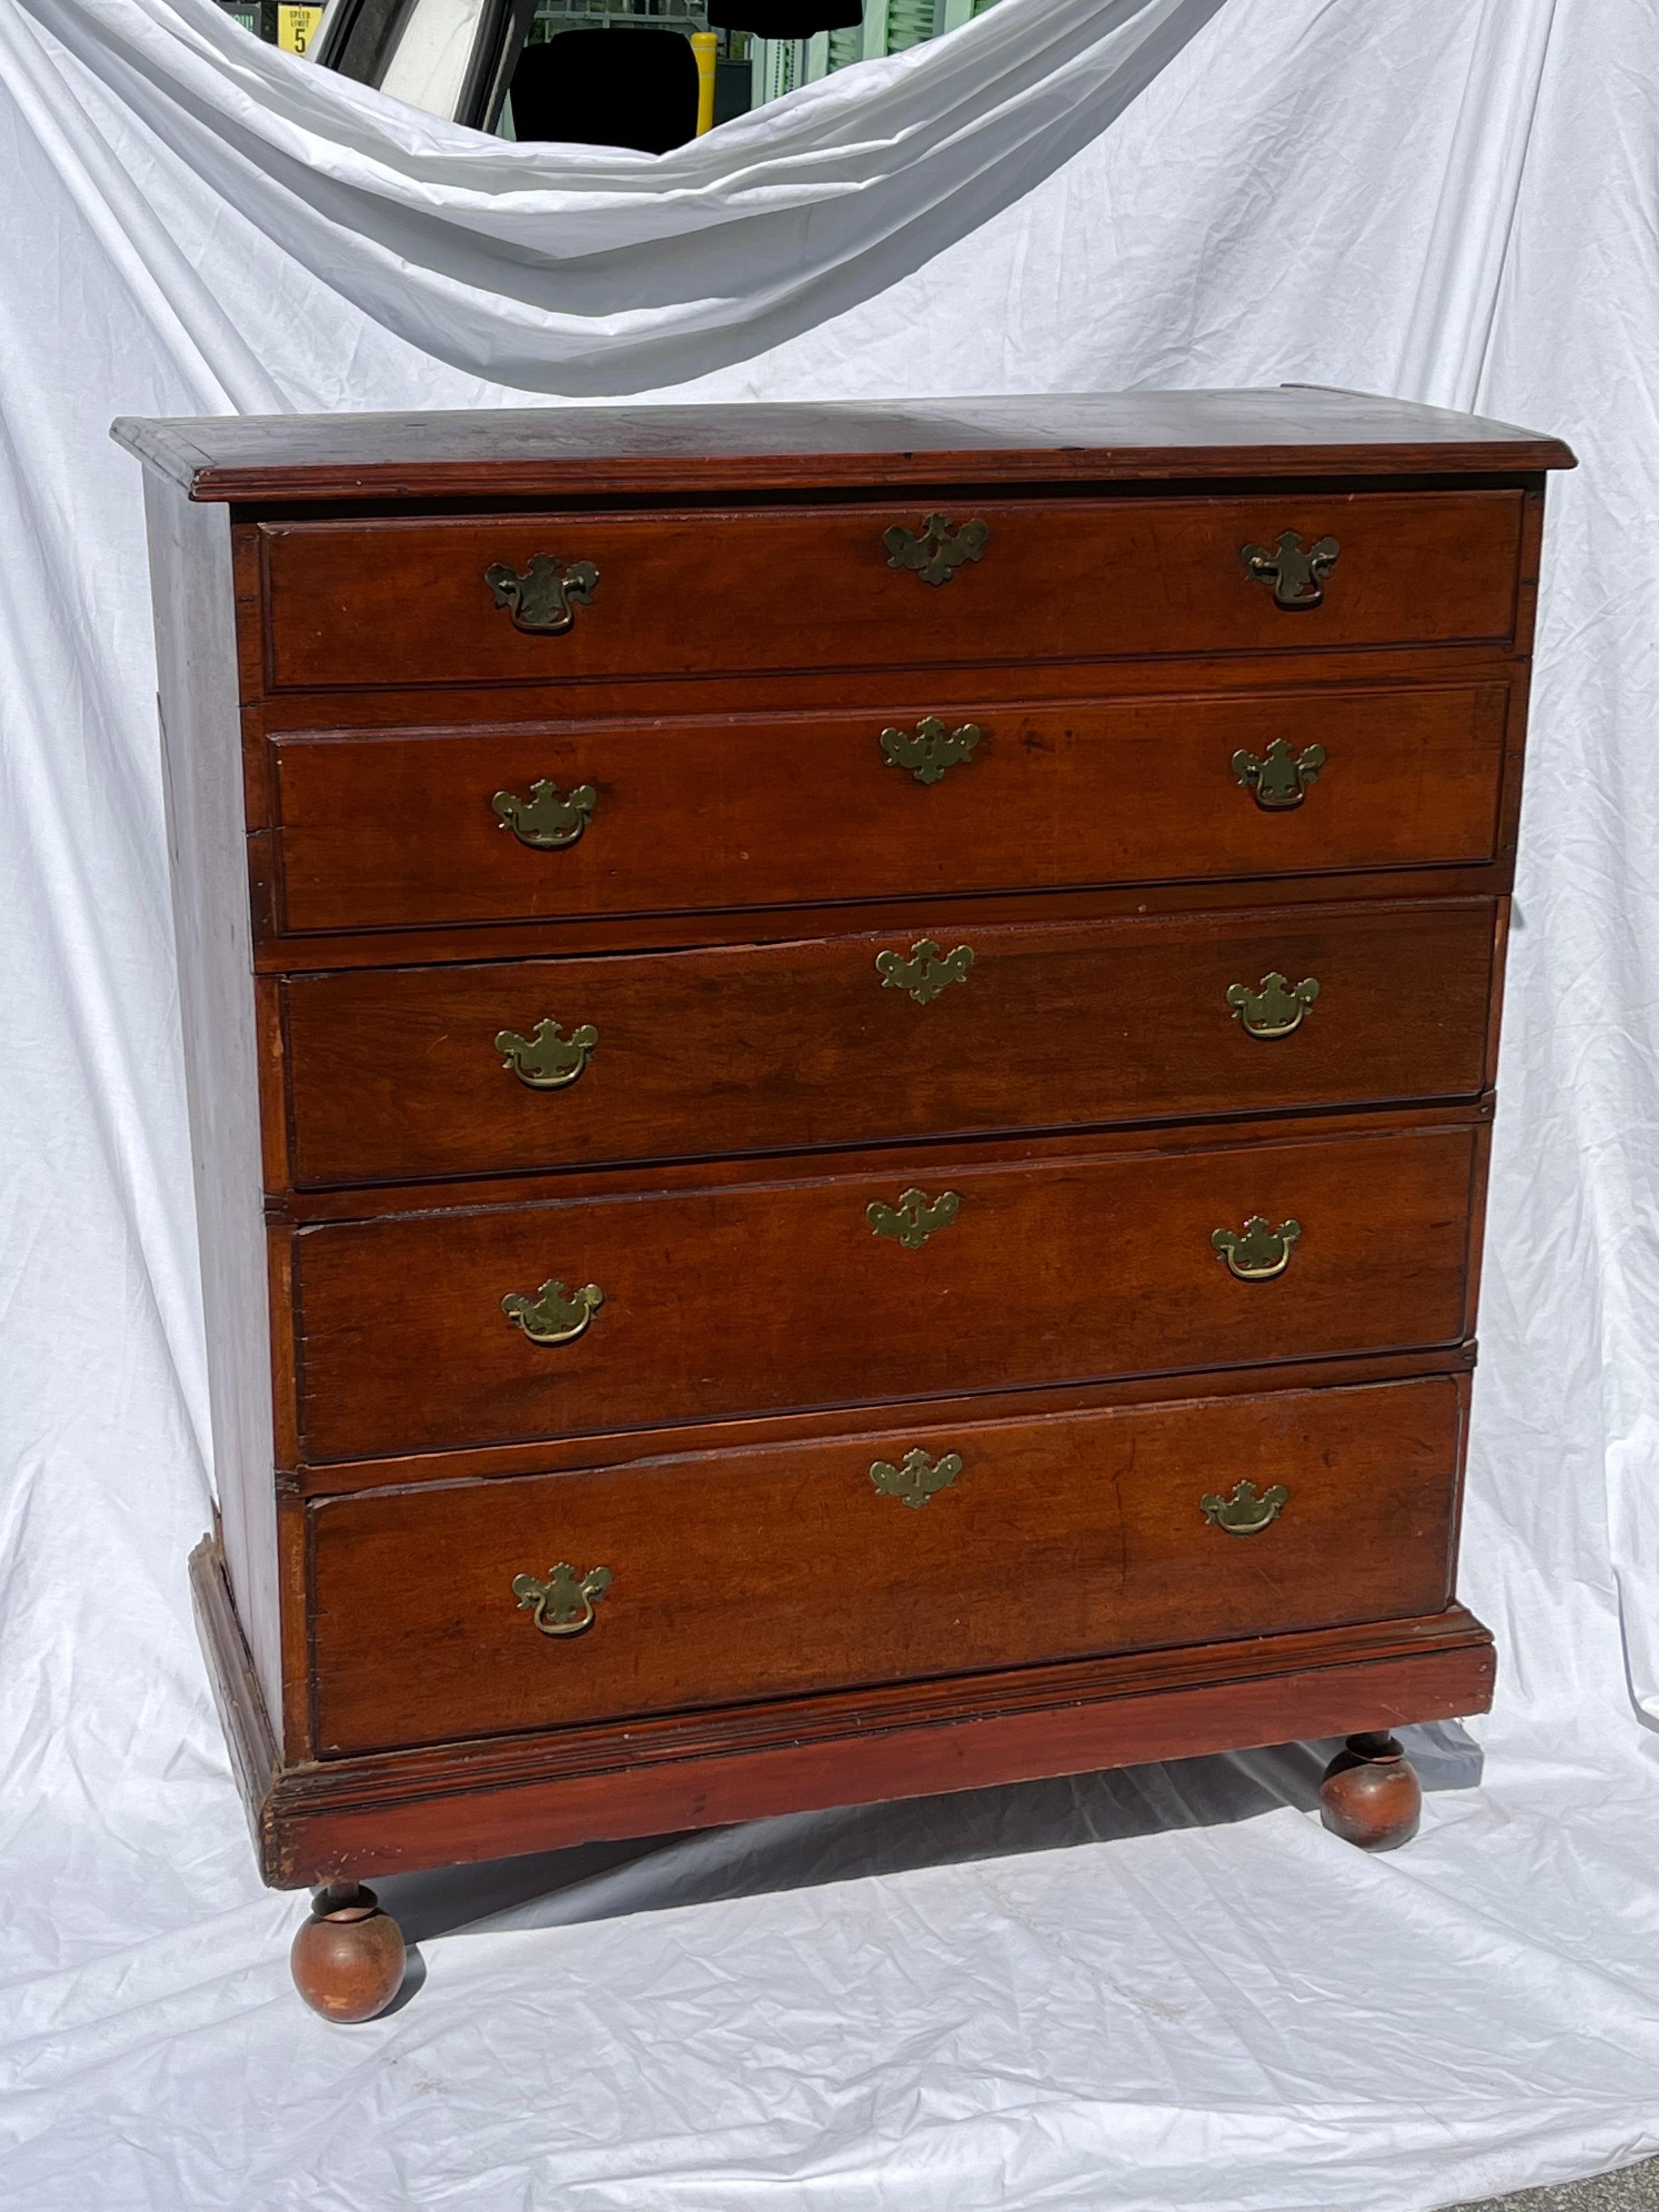 An antique mid to late 19th century William and Mary style Mule Chest with a hinged lid that opens to a blanket chest storage area with two false drawer fronts at the top. Underneath, there are three graduated drawers. Brass escutcheons and pulls. A